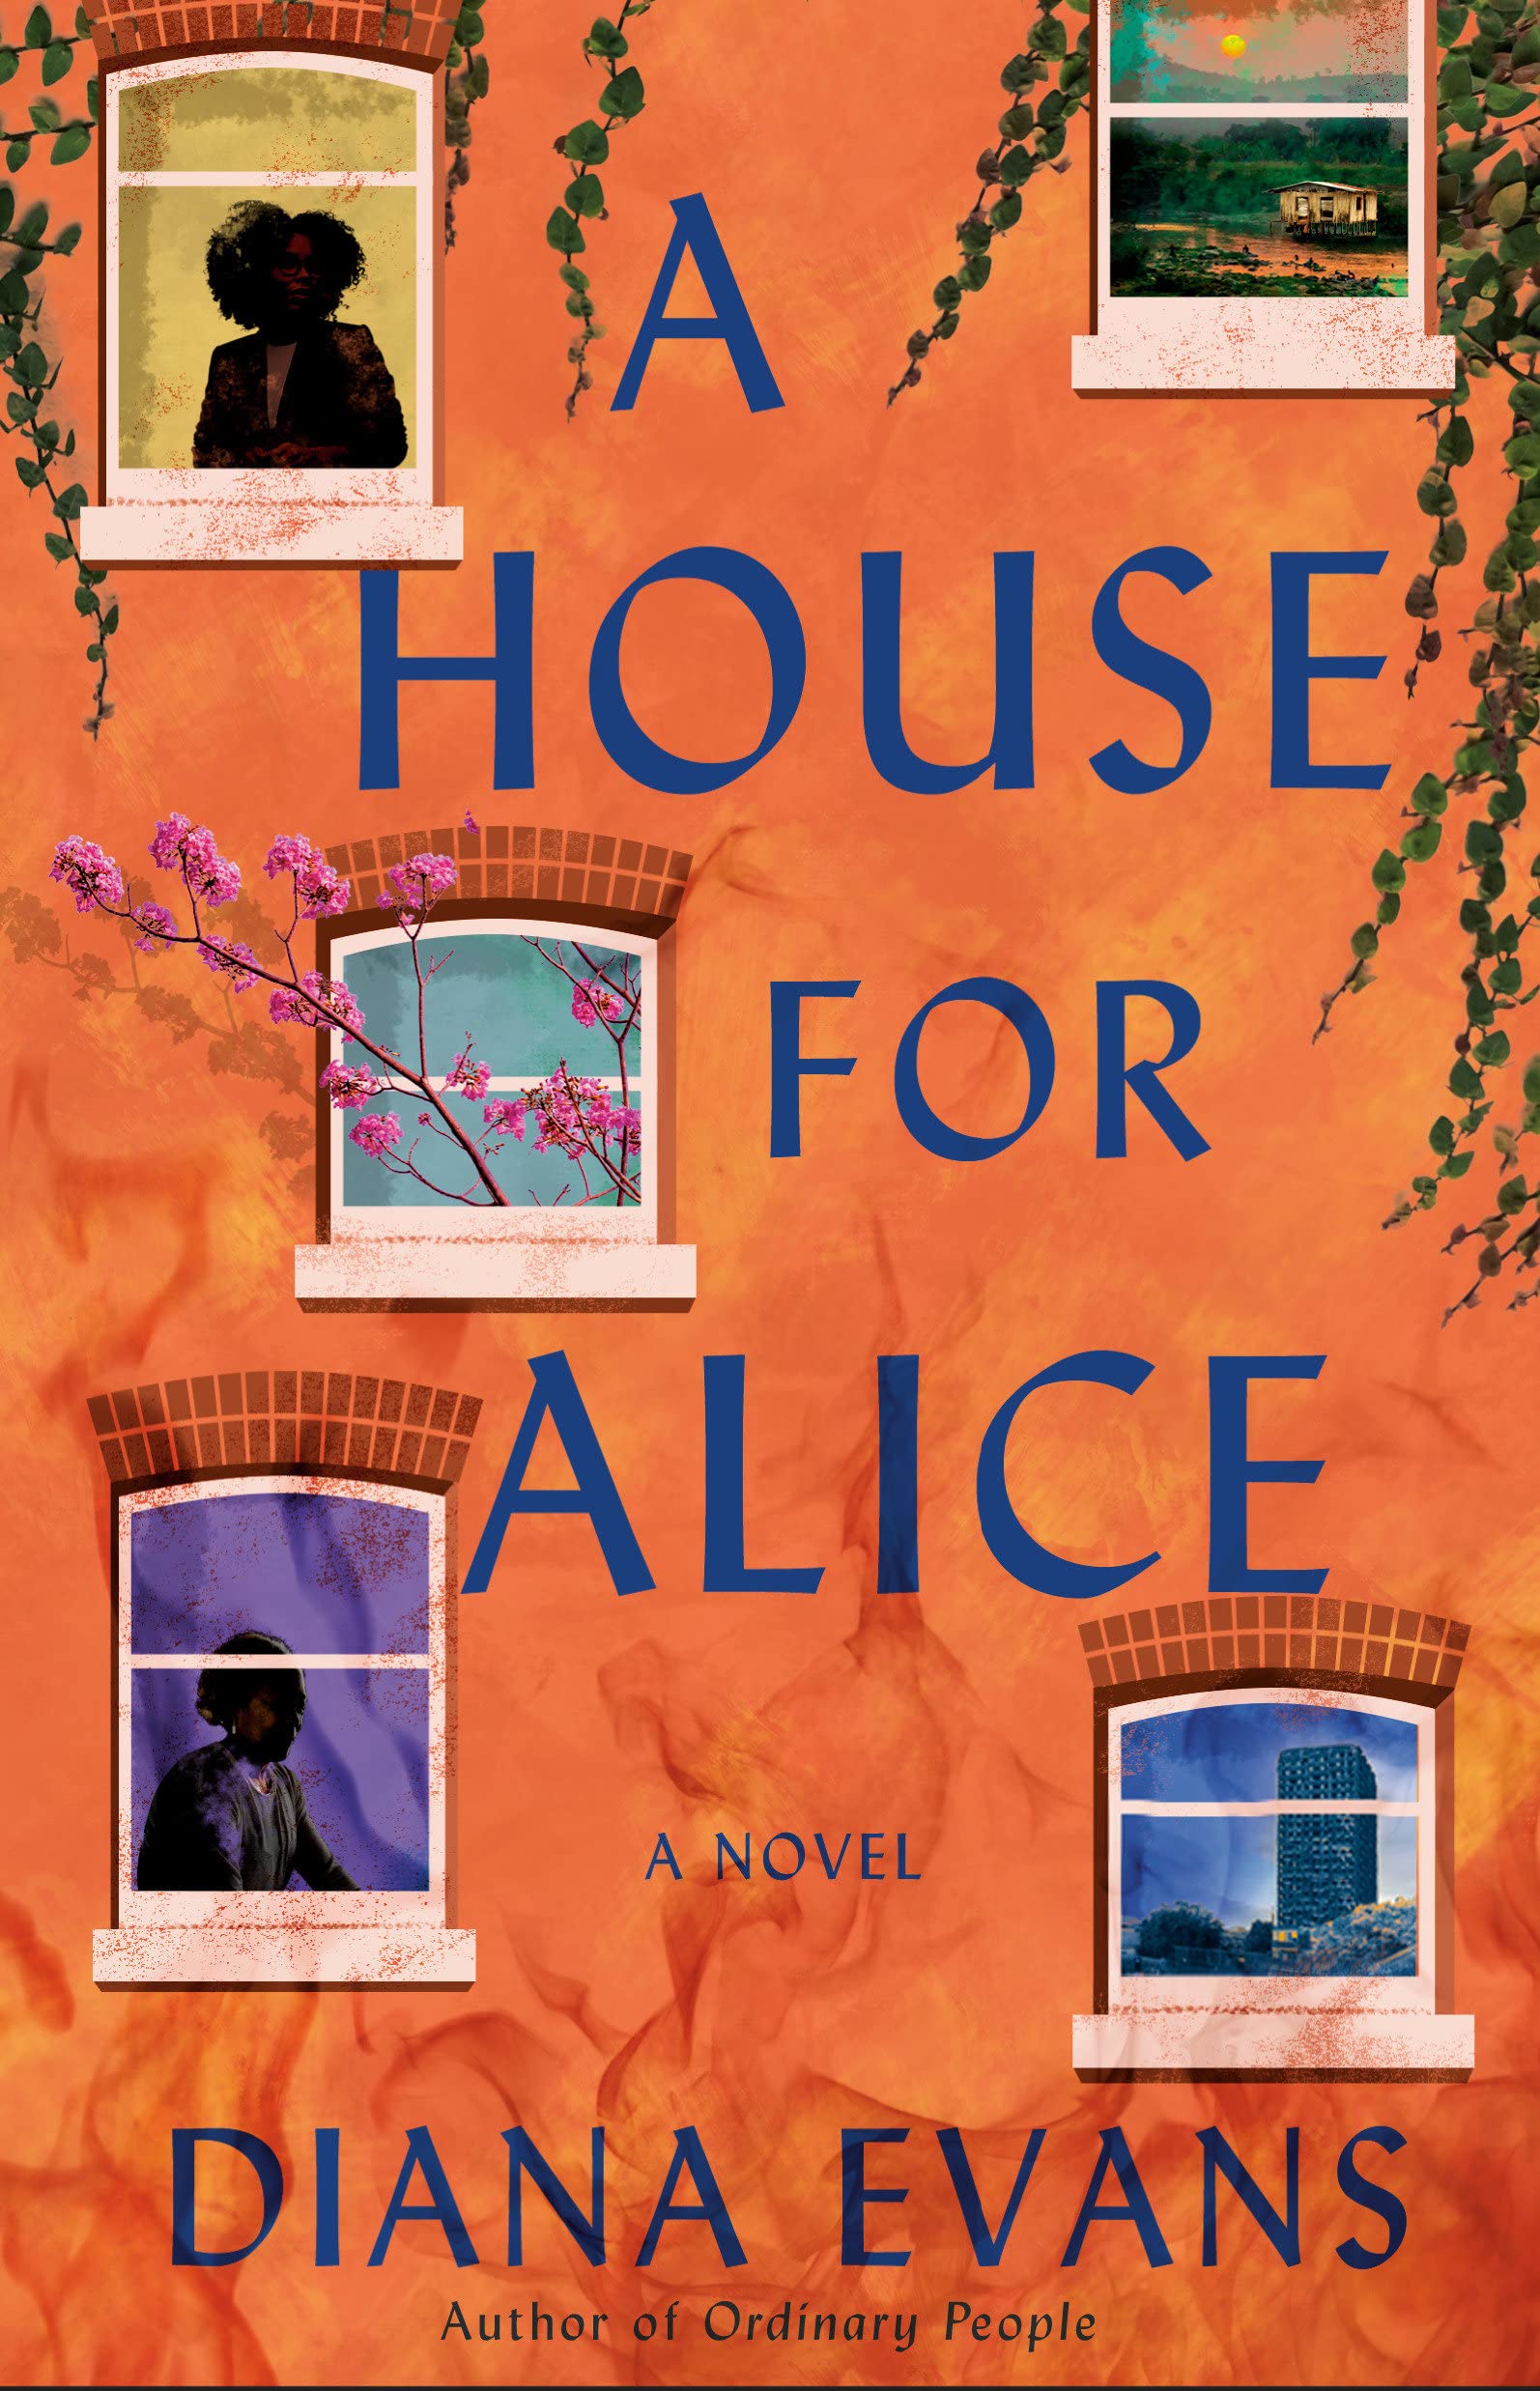 Image for "A House for Alice"